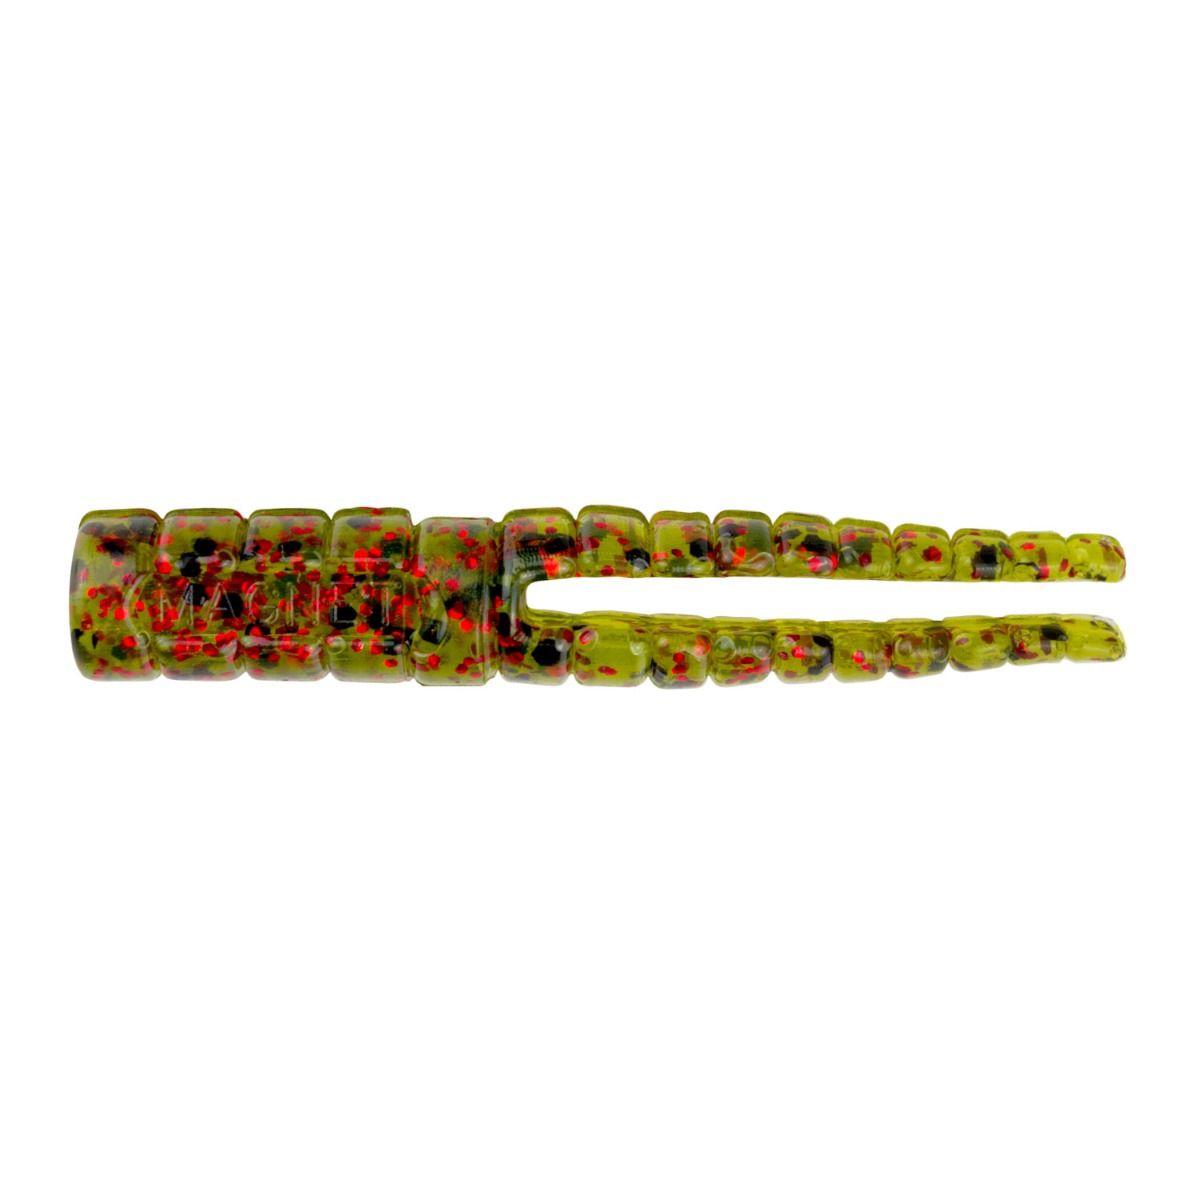 Crappie Magnet 15pc. Body Packs